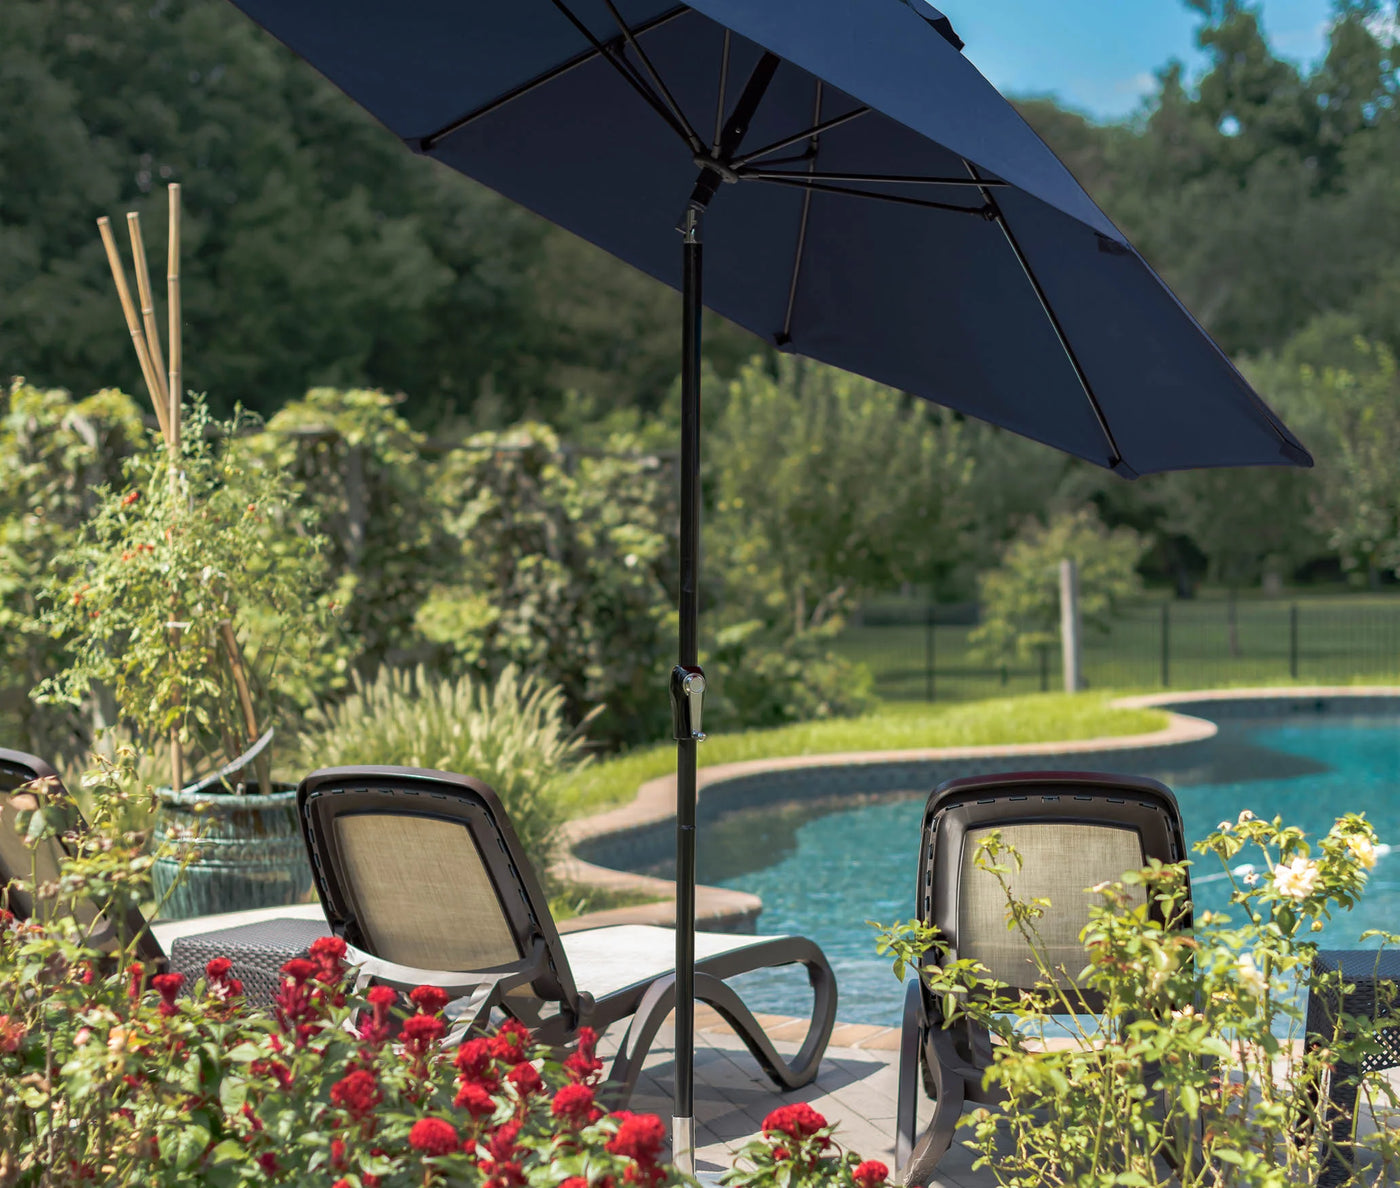 A Dark Blue Monterey 11' Crank Auto Tilt Outdoor umbrella is open above two lounge chairs that are sitting in front of a swimming pool. The pool and chairs are surrounded by a garden of plants and flowers